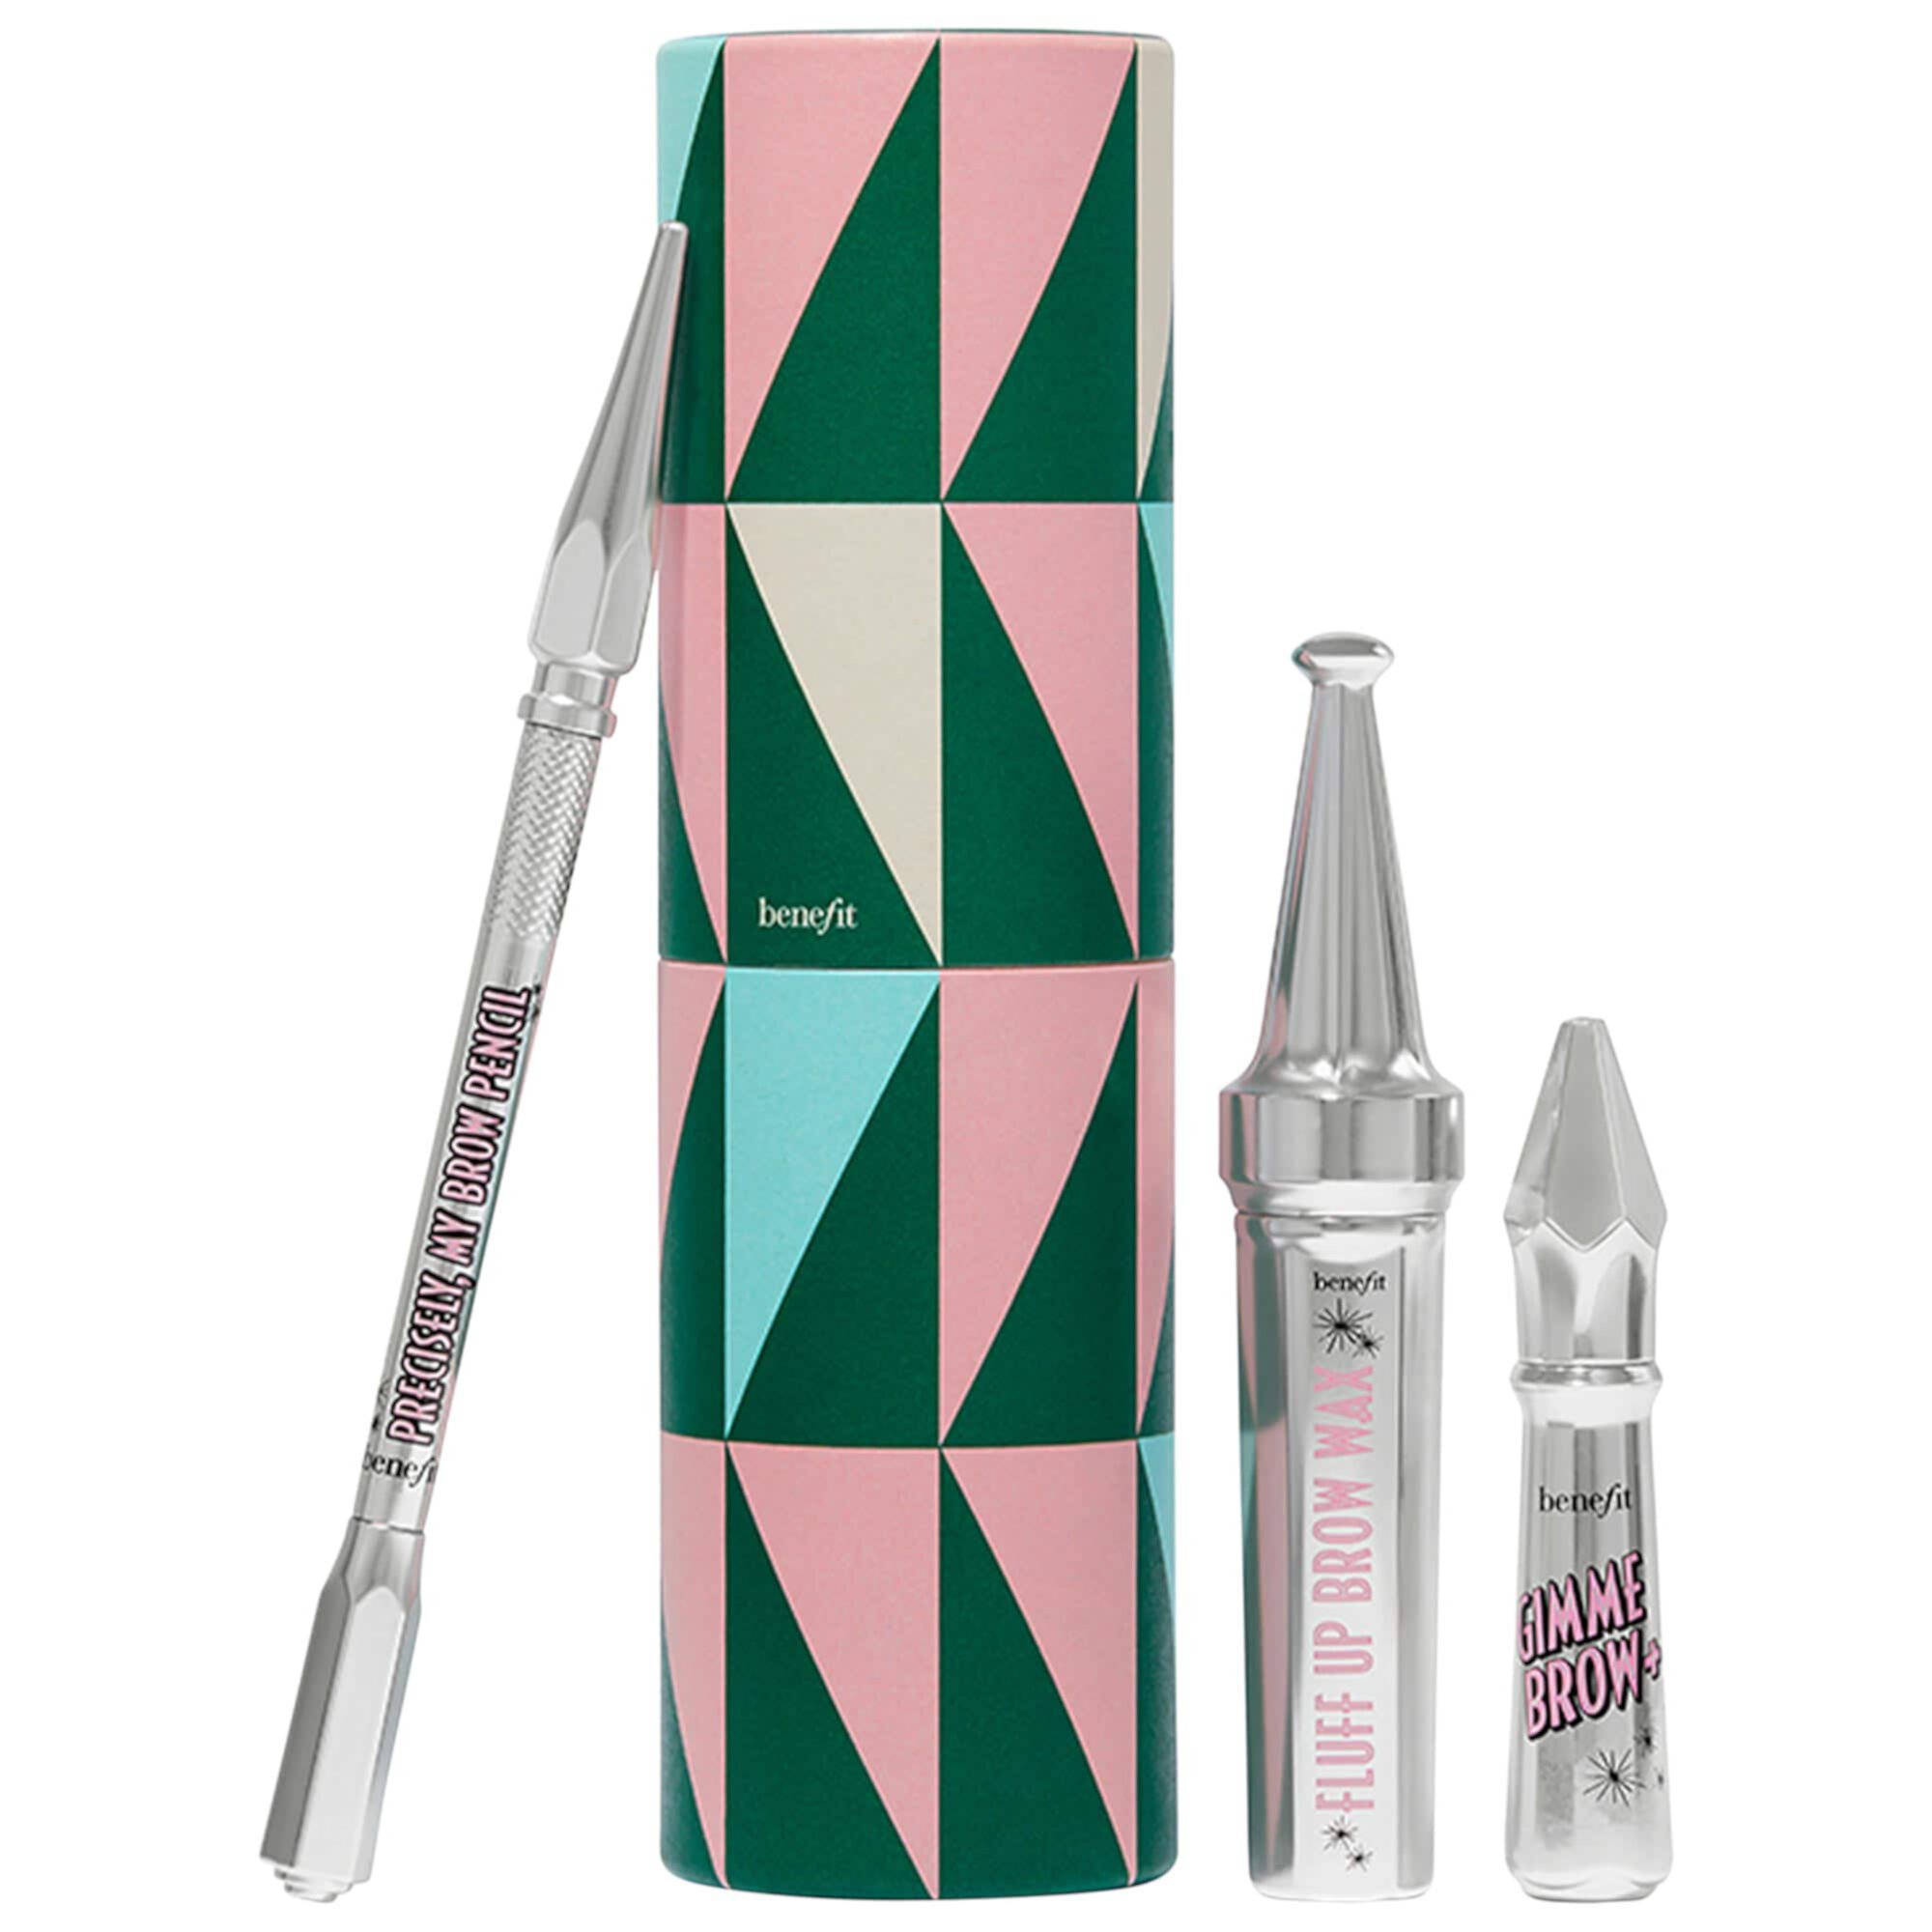 Fluffin’ Festive Brows Brow Pencil, Gel, And Wax Value Set Benefit Cosmetics